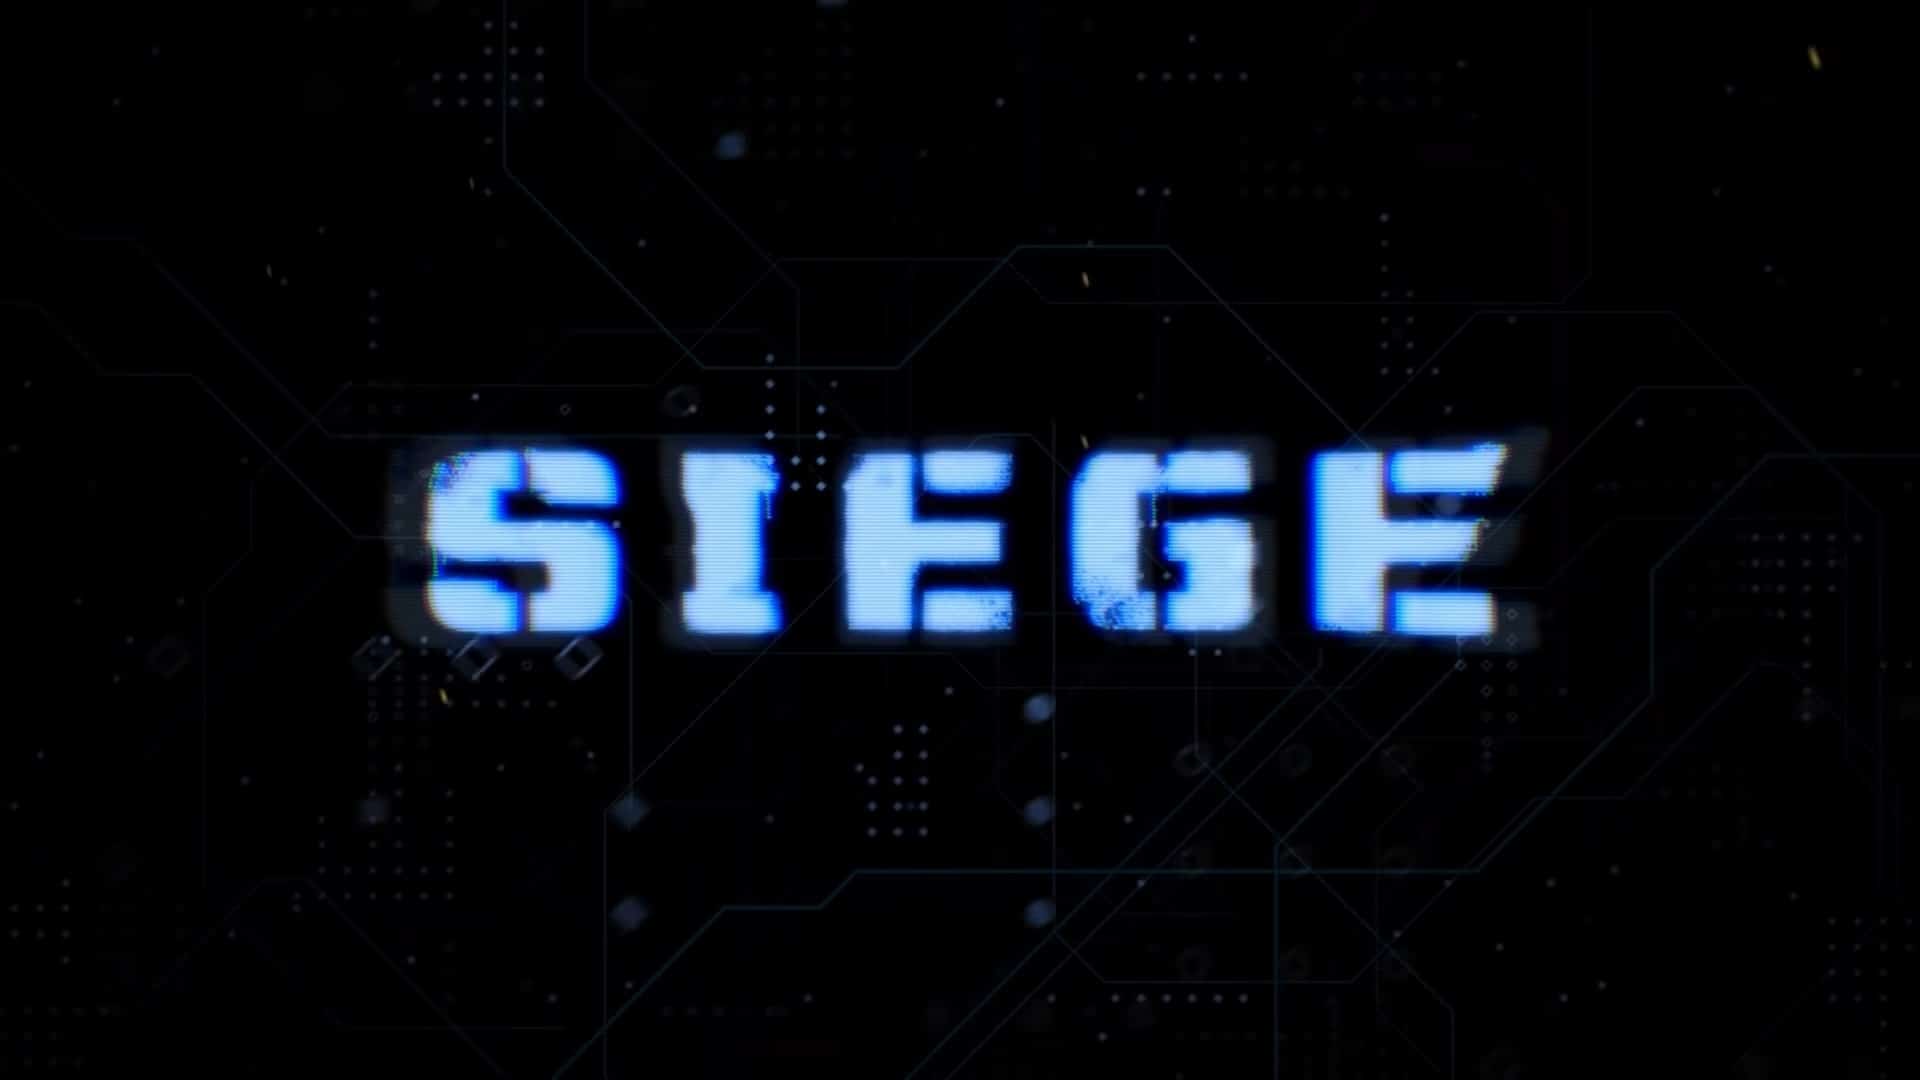 Netflix Transformers War For Cybertron Trilogy Siege Trailer, Netflix Transformers Siege Trailers, Coming to Netflix in July 2020